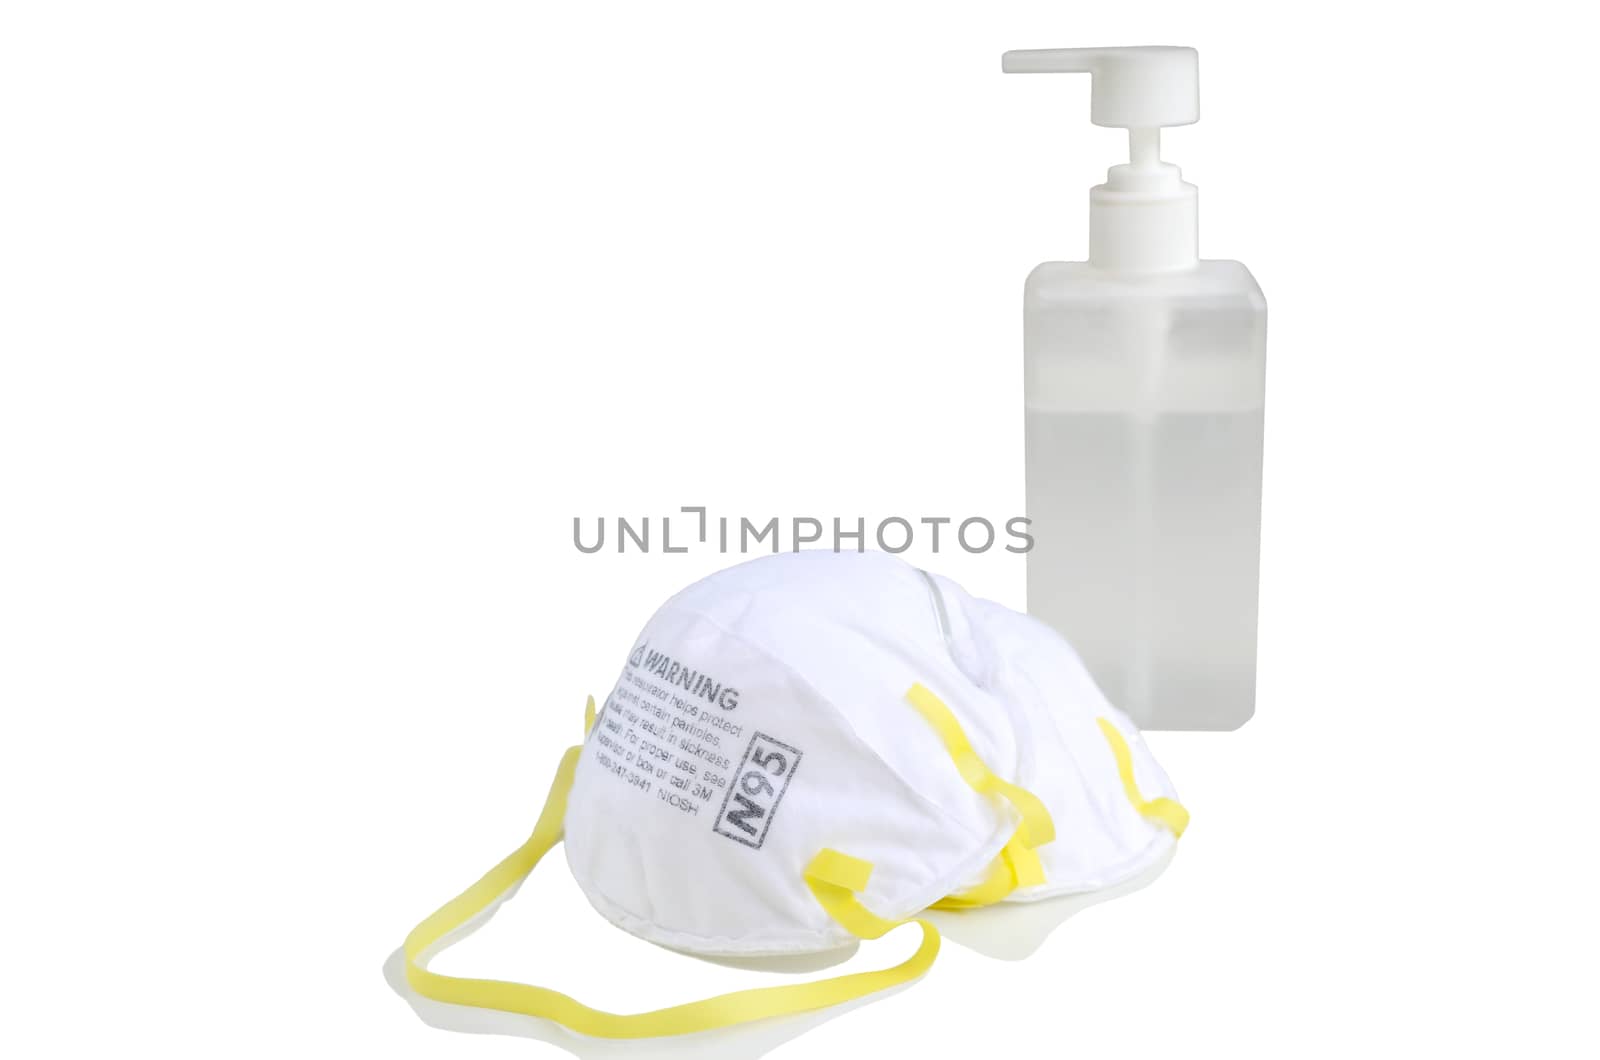 N95 respirator  with alcohol sanitizer gel isolated on white background for covid-19 Coronavirus prevention concept.